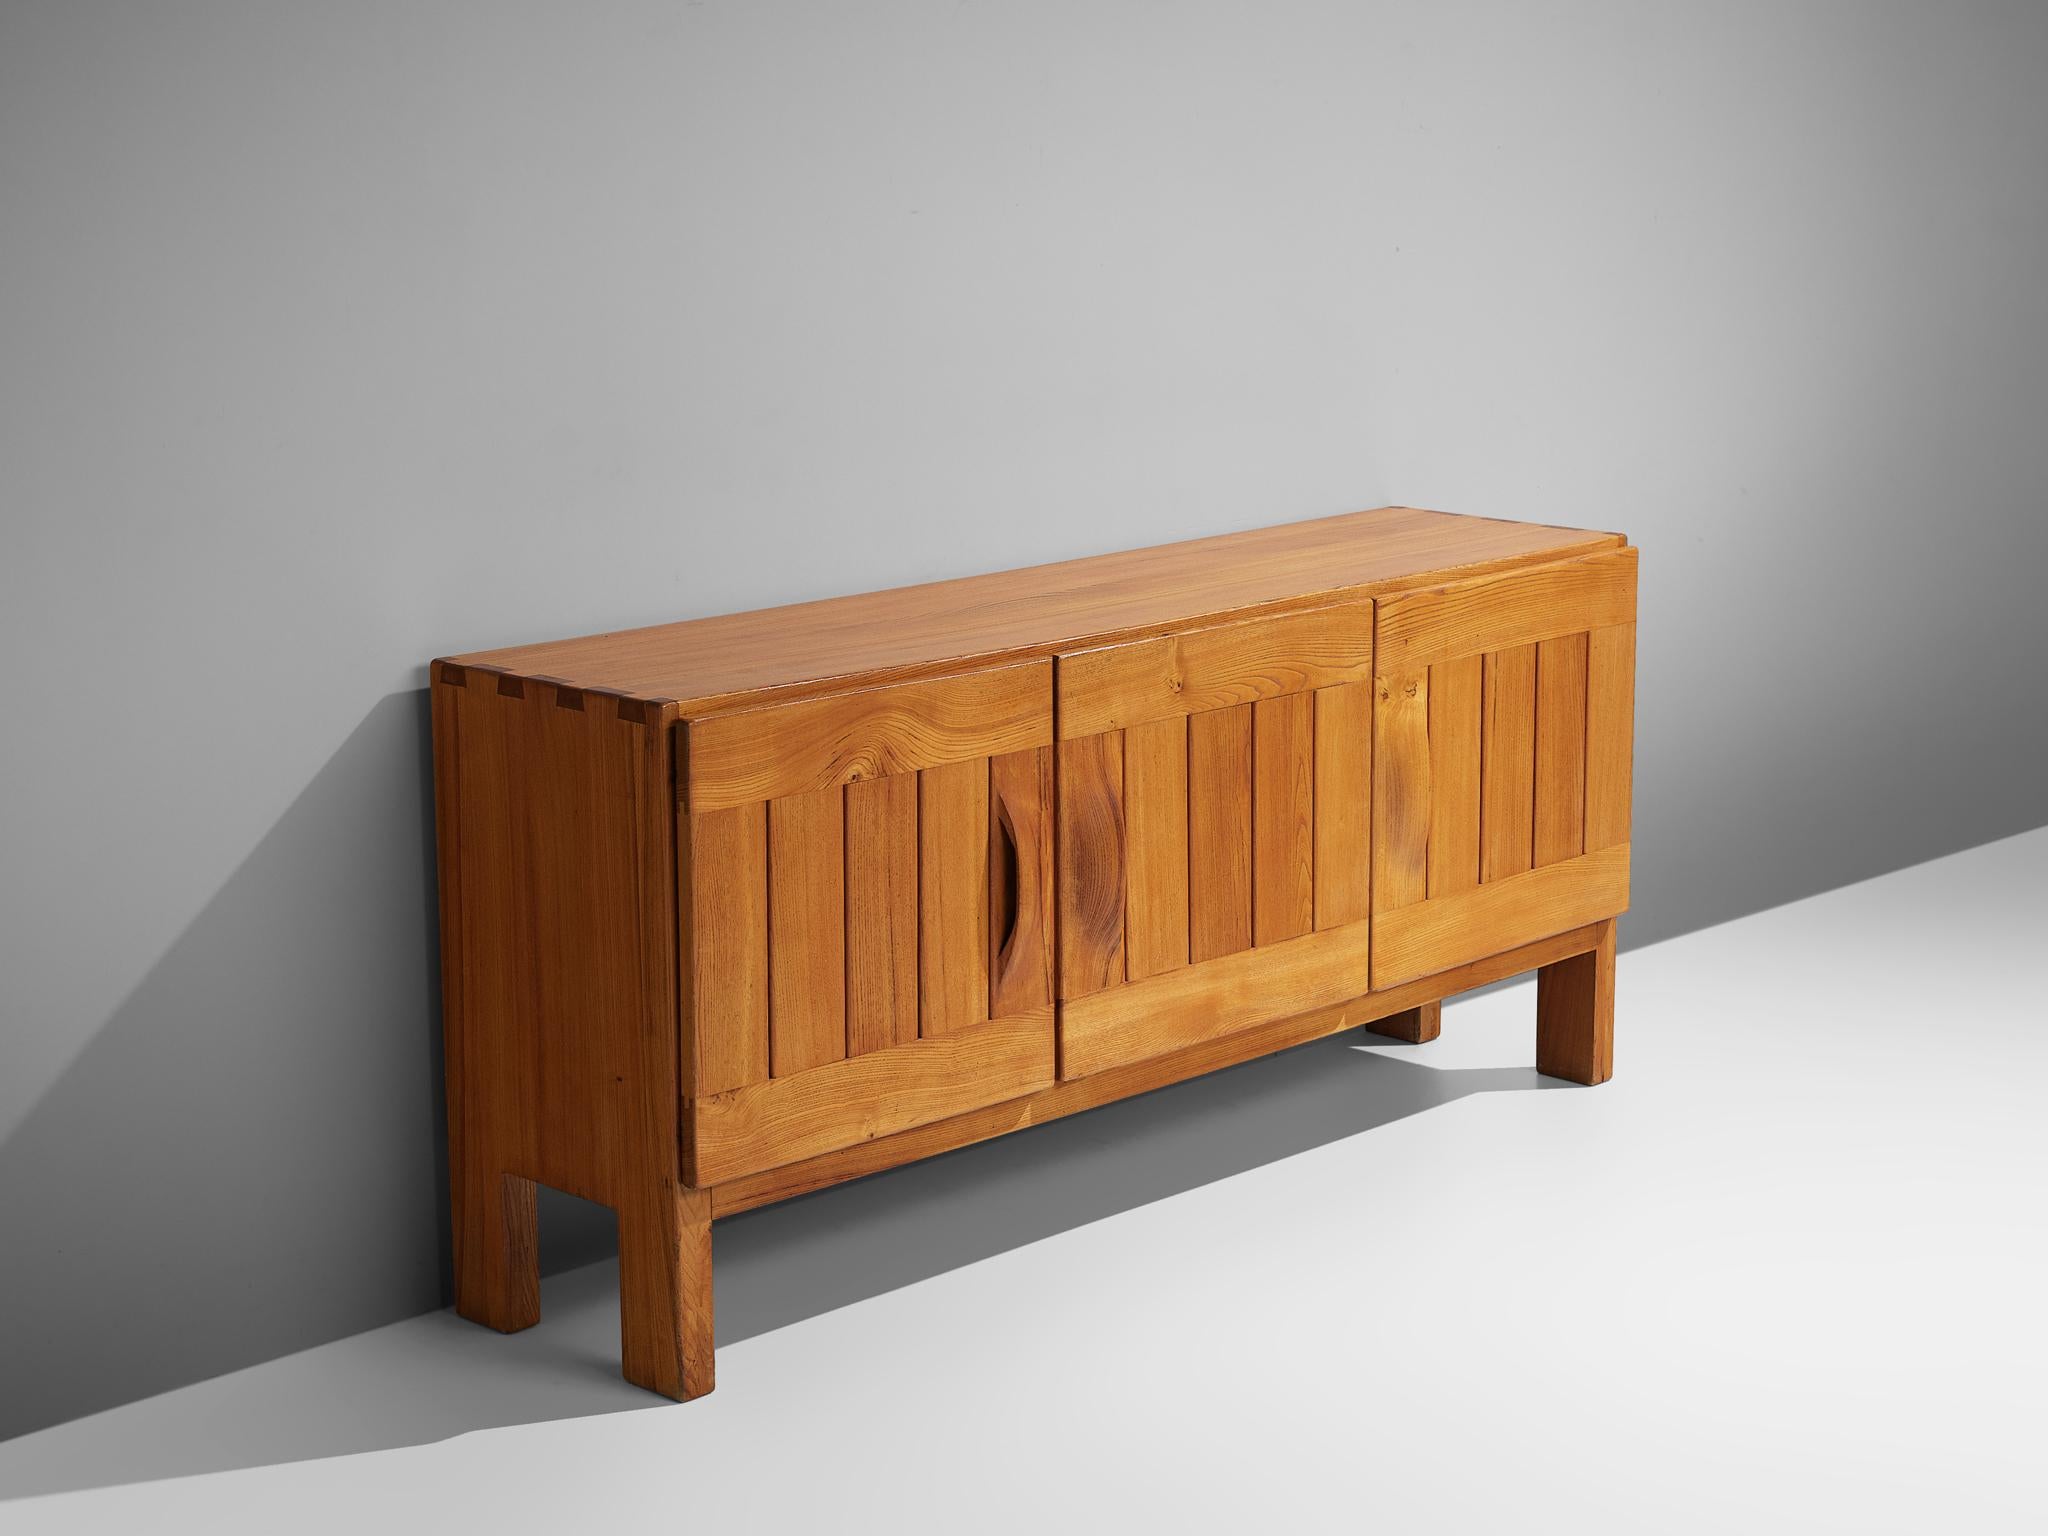 Maison Regain, sideboard, elm, France, 1960s.

This elm credenza combines a simplified yet complex design combined with nifty, solid construction details that characterize Maison Regain's designs. The three well balanced, sturdy doors are geometric